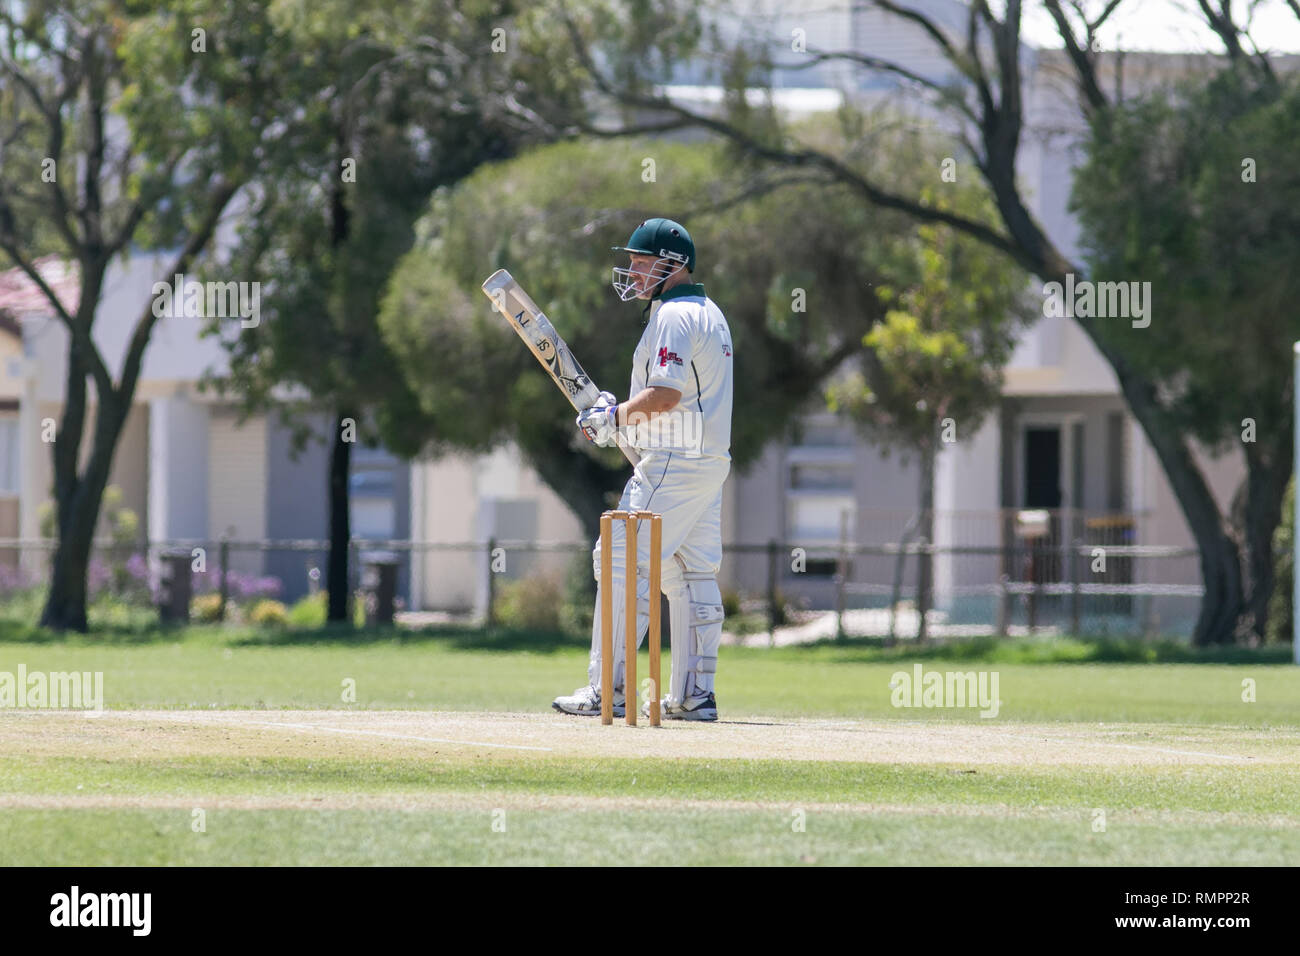 Adelaide, Australia. 16th Feb, 2019. An Association Cricket match between Woodville Rechabites Cricket club and Pooraka Mighty Bulls being played at the Matheson Reserve on a hot saturday afternoon with temperatures of 29 degrees celsius Credit: amer ghazzal/Alamy Live News Stock Photo